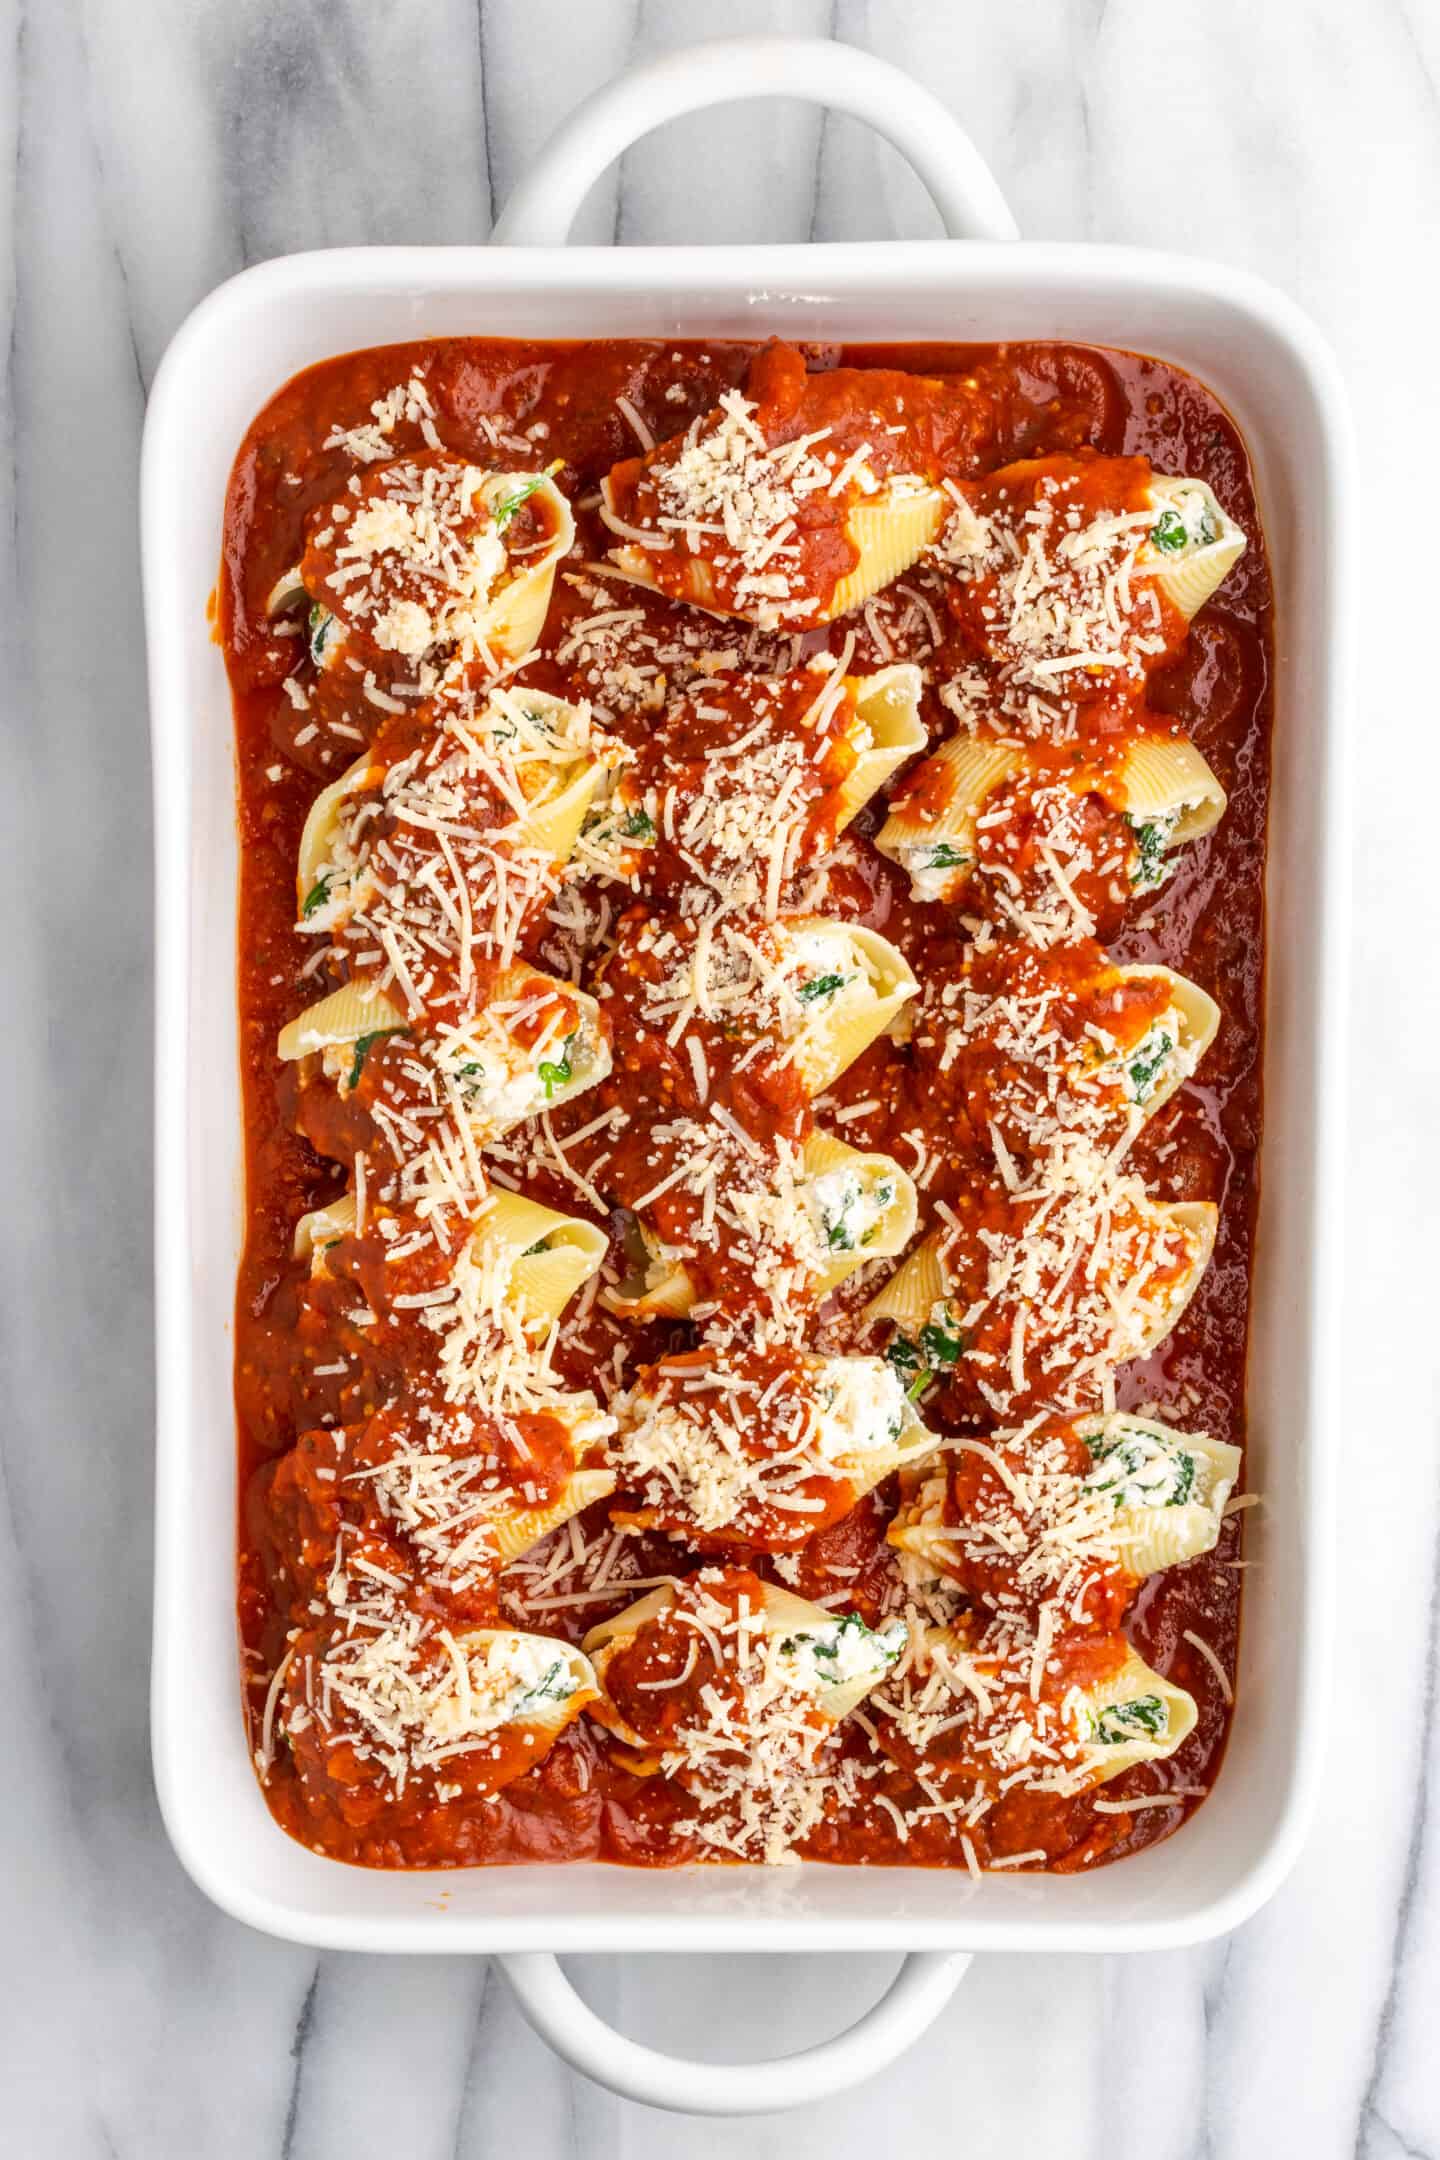 Vegan stuffed shells in a casserole dish, covered in marinara sauce and cheese